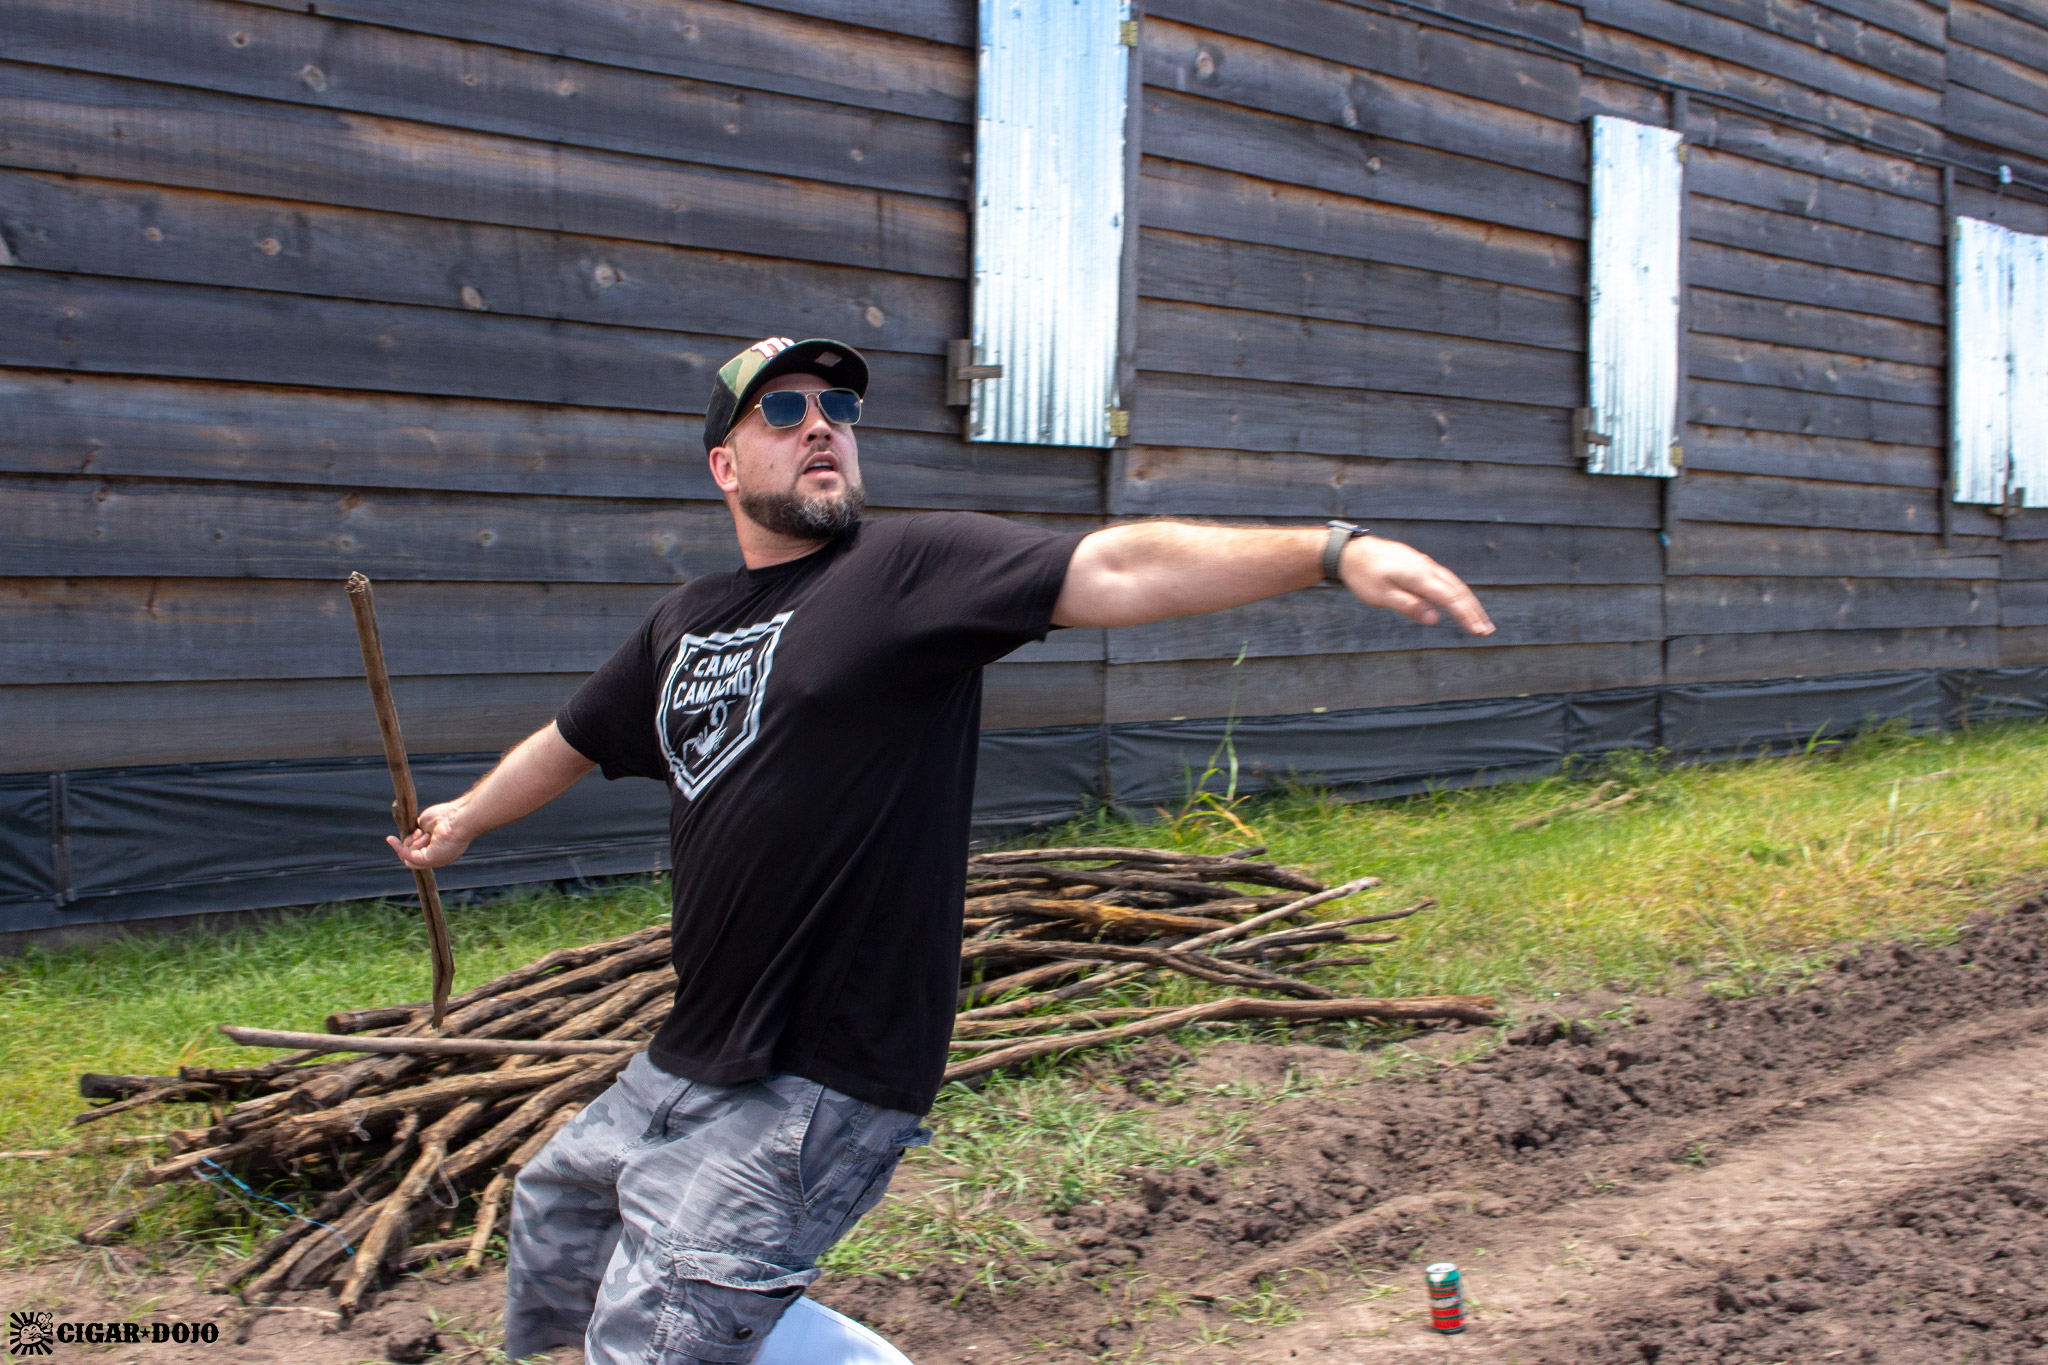 Spear throwing at Camp Camacho